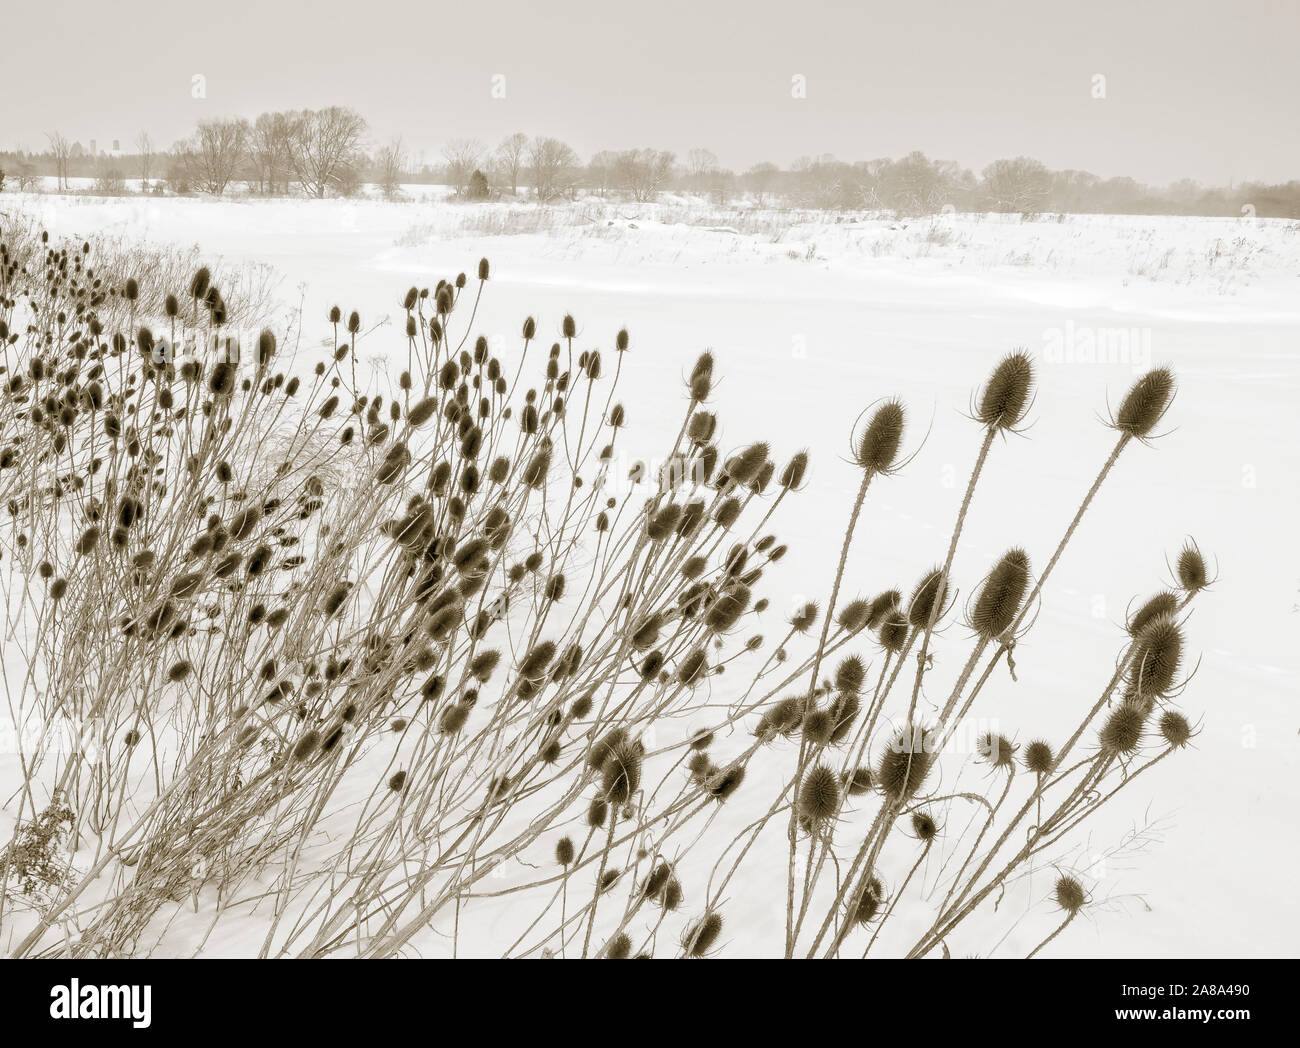 A stand of bare teasel line an expanse of frozen river covered in a blanket of fresh snow with a snowy treelike along the far shore Stock Photo